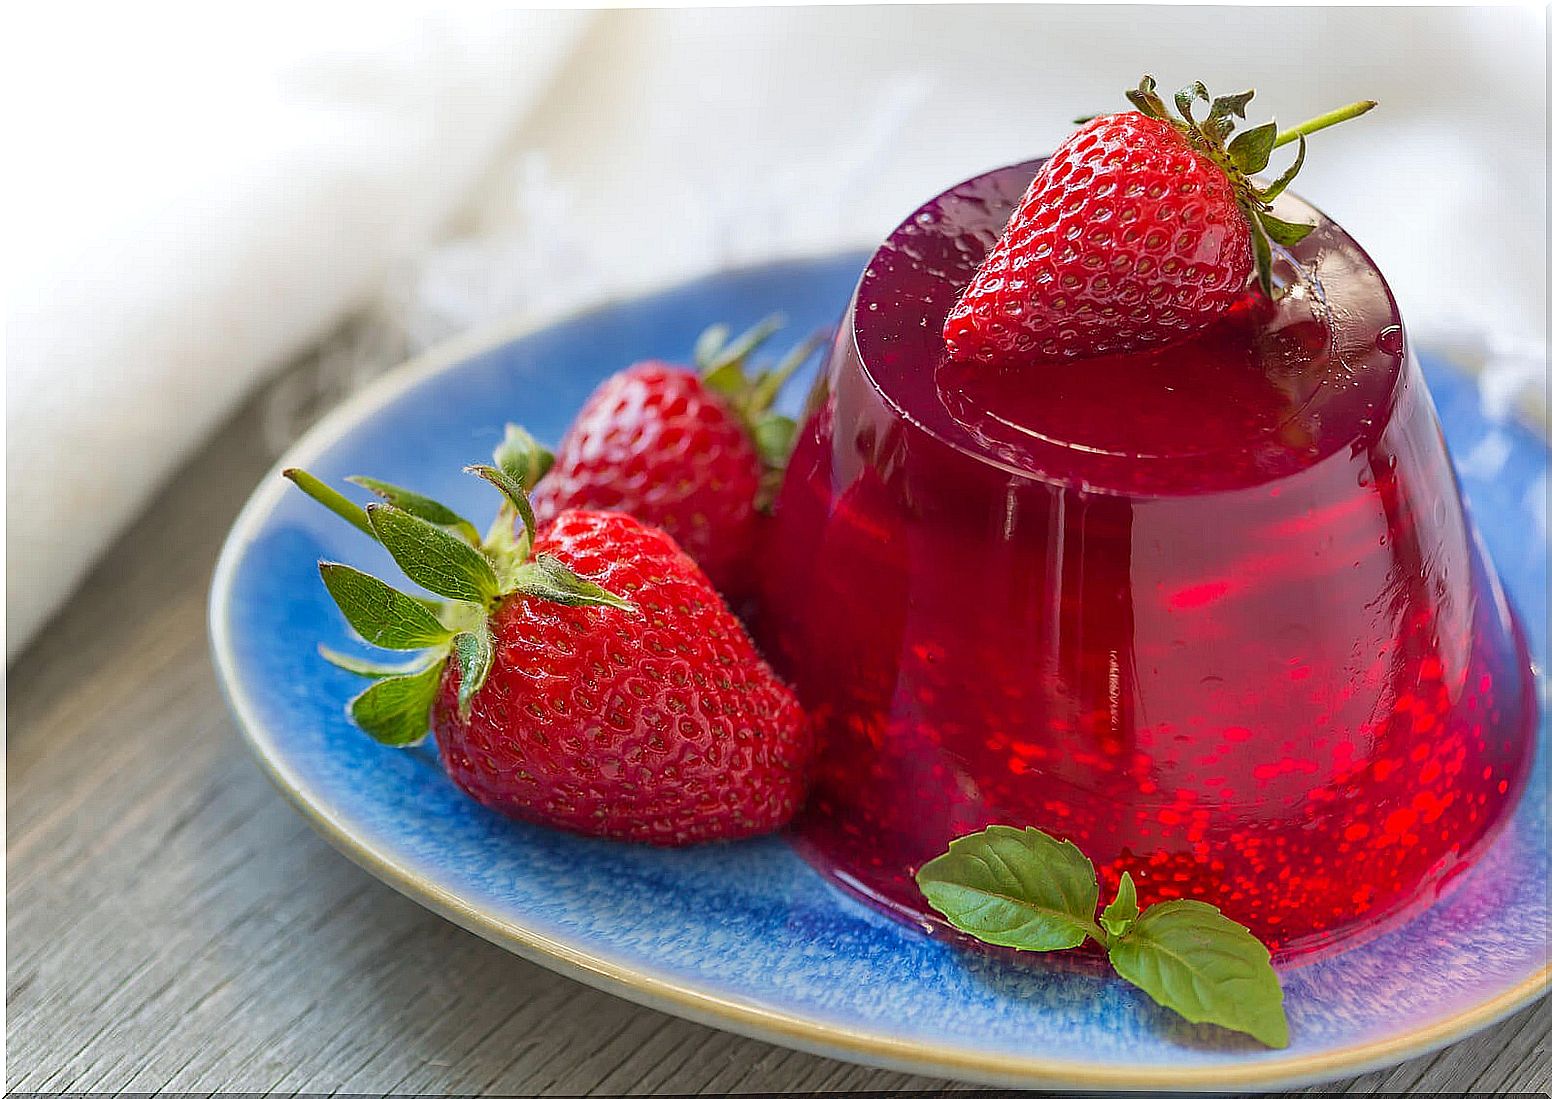 Why should you eat jelly?